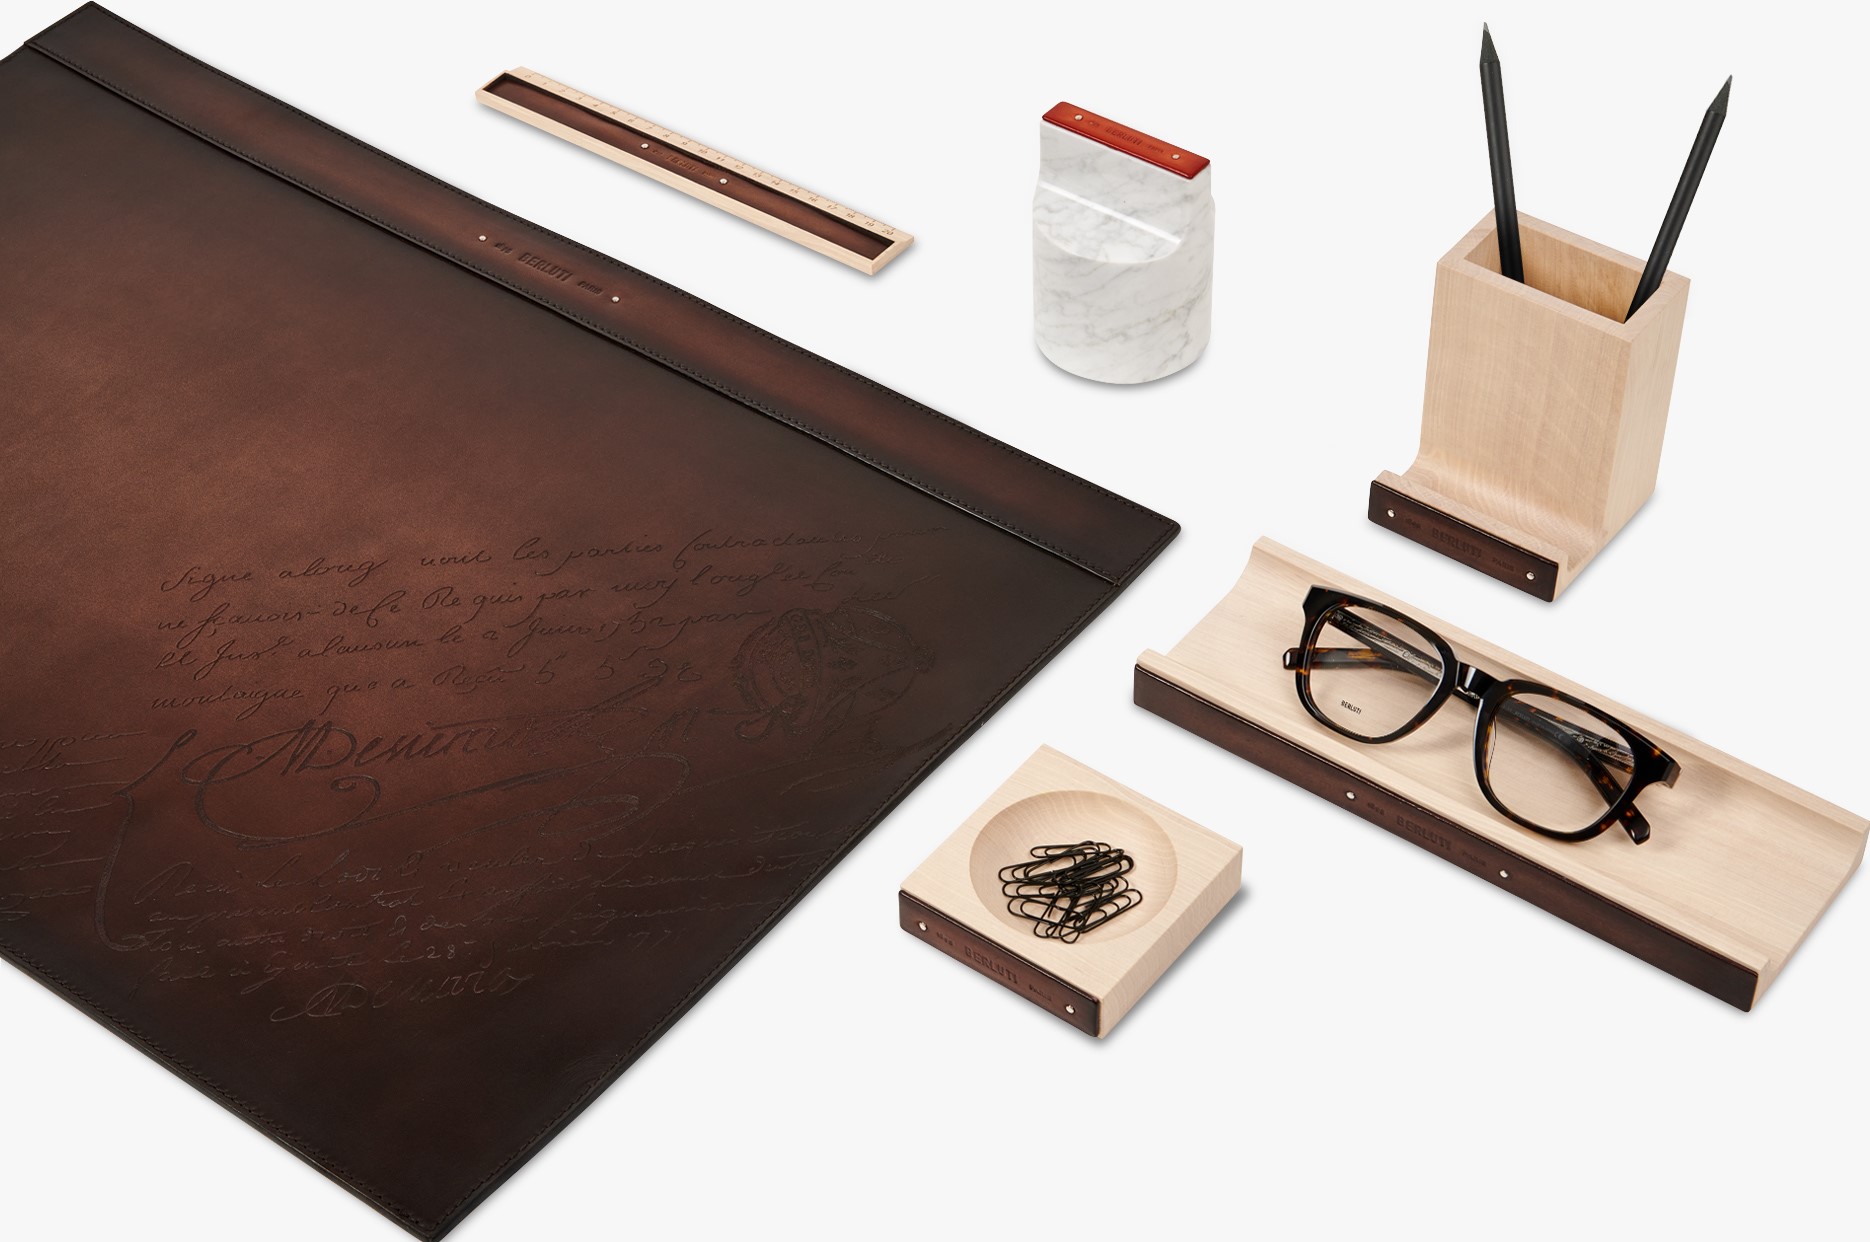 Berluti unveils its new Home & Office Objects collection